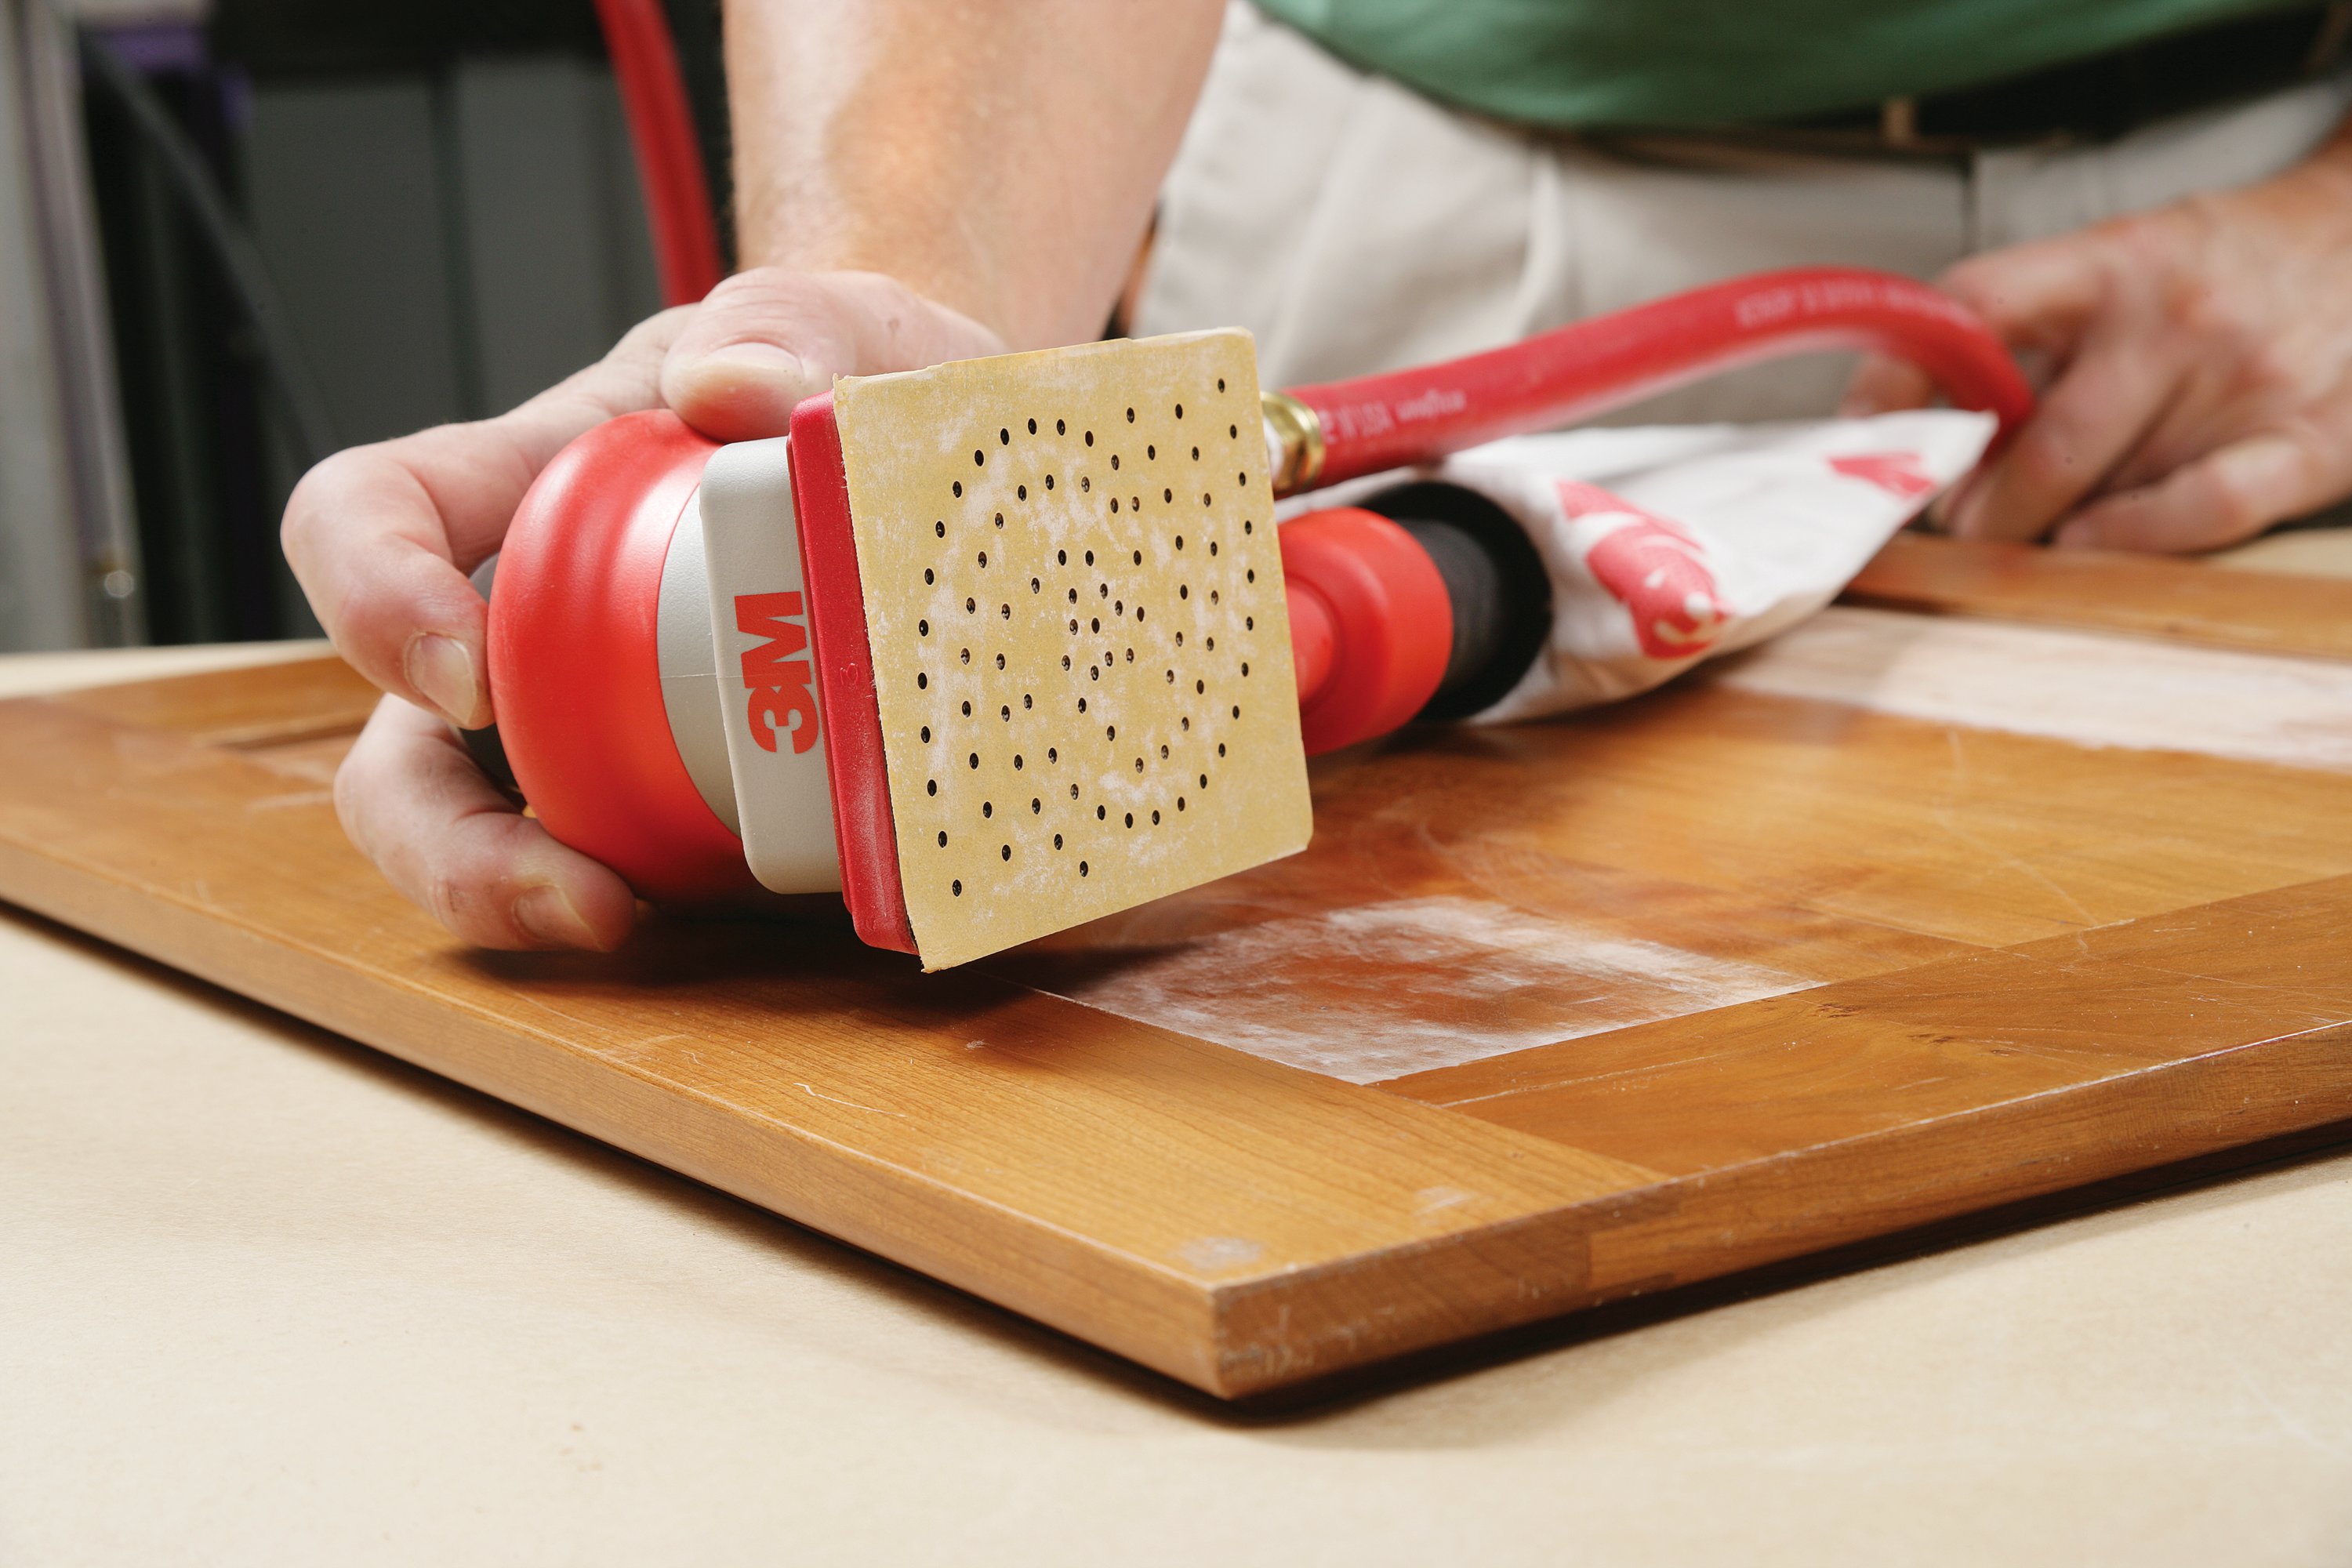 Make fast work of sanding and surface preparation on wood, metal, fiberglass and composite materials.